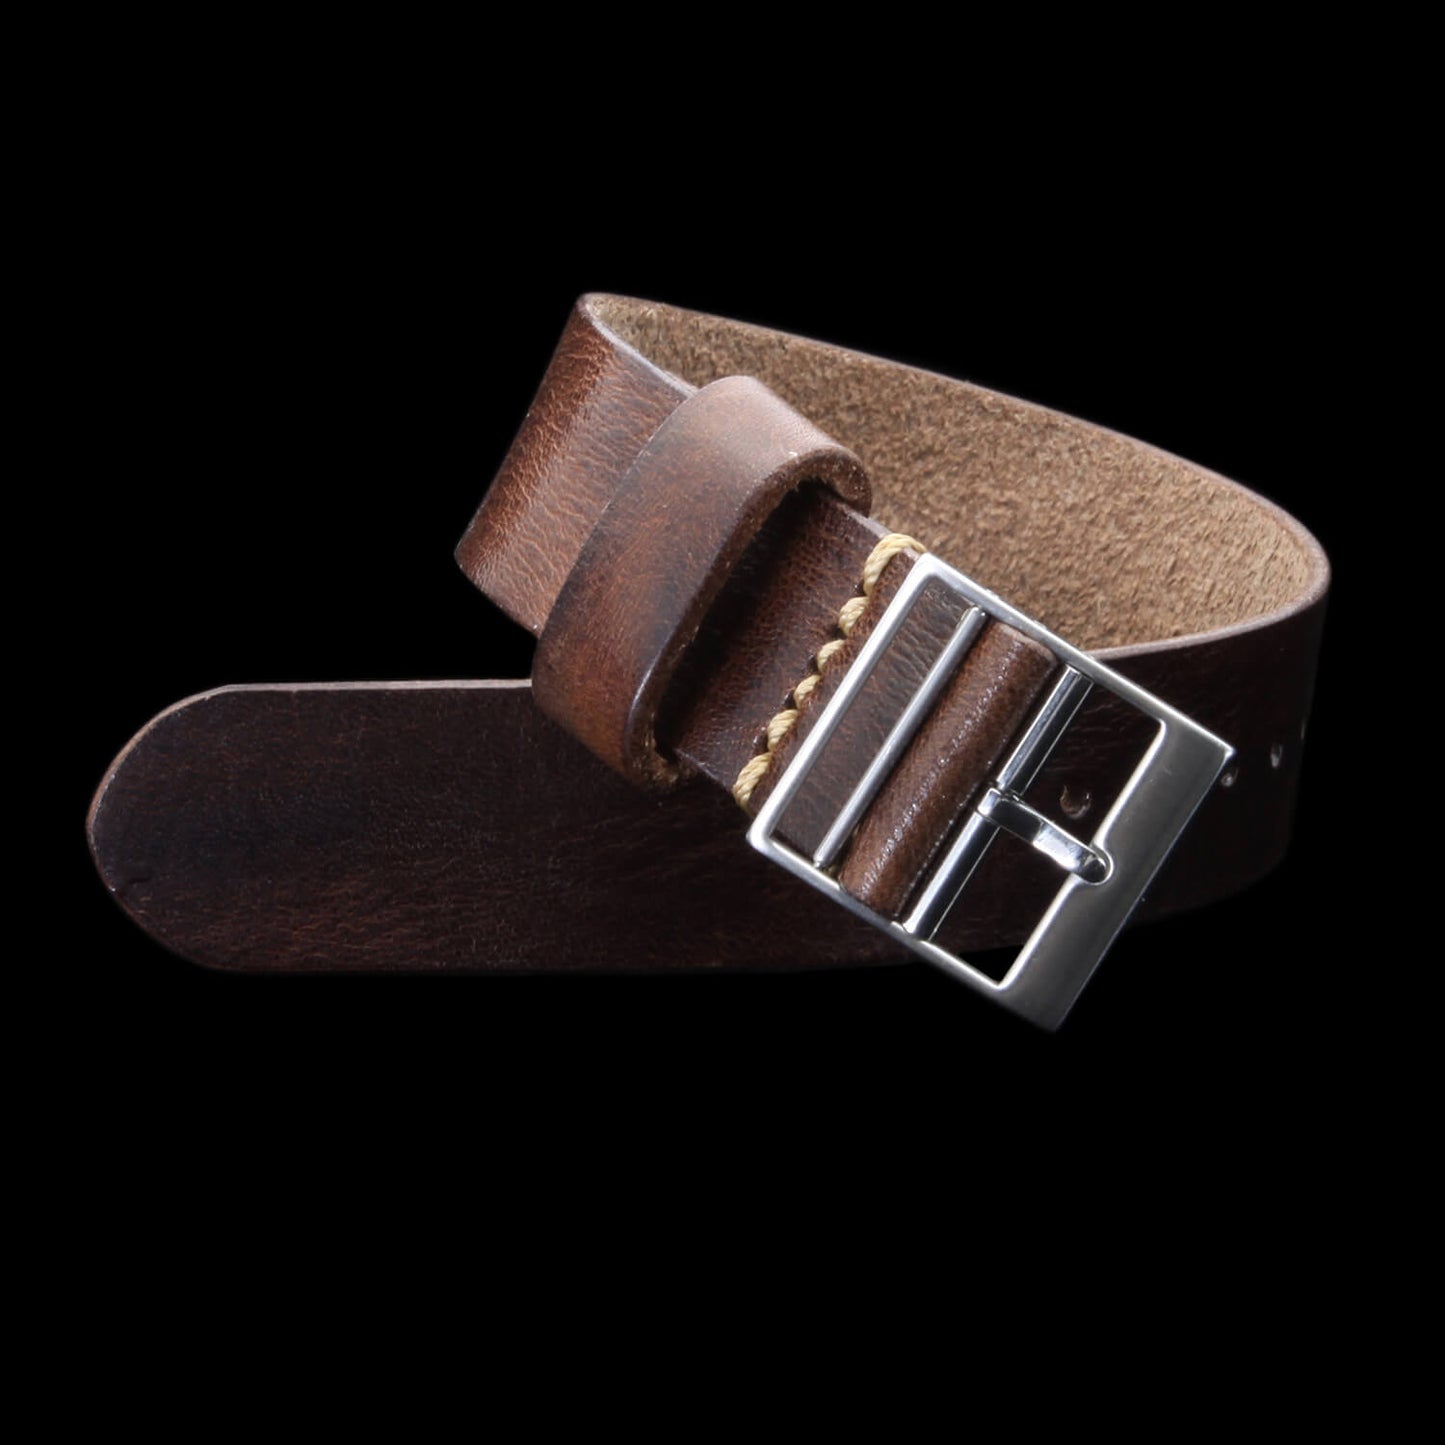 Leather Watch Strap, Classic RAF II Military 103 | Ladder Buckle | Full Grain Italian Vegetable-Tanned Leather | Cozy Handmade